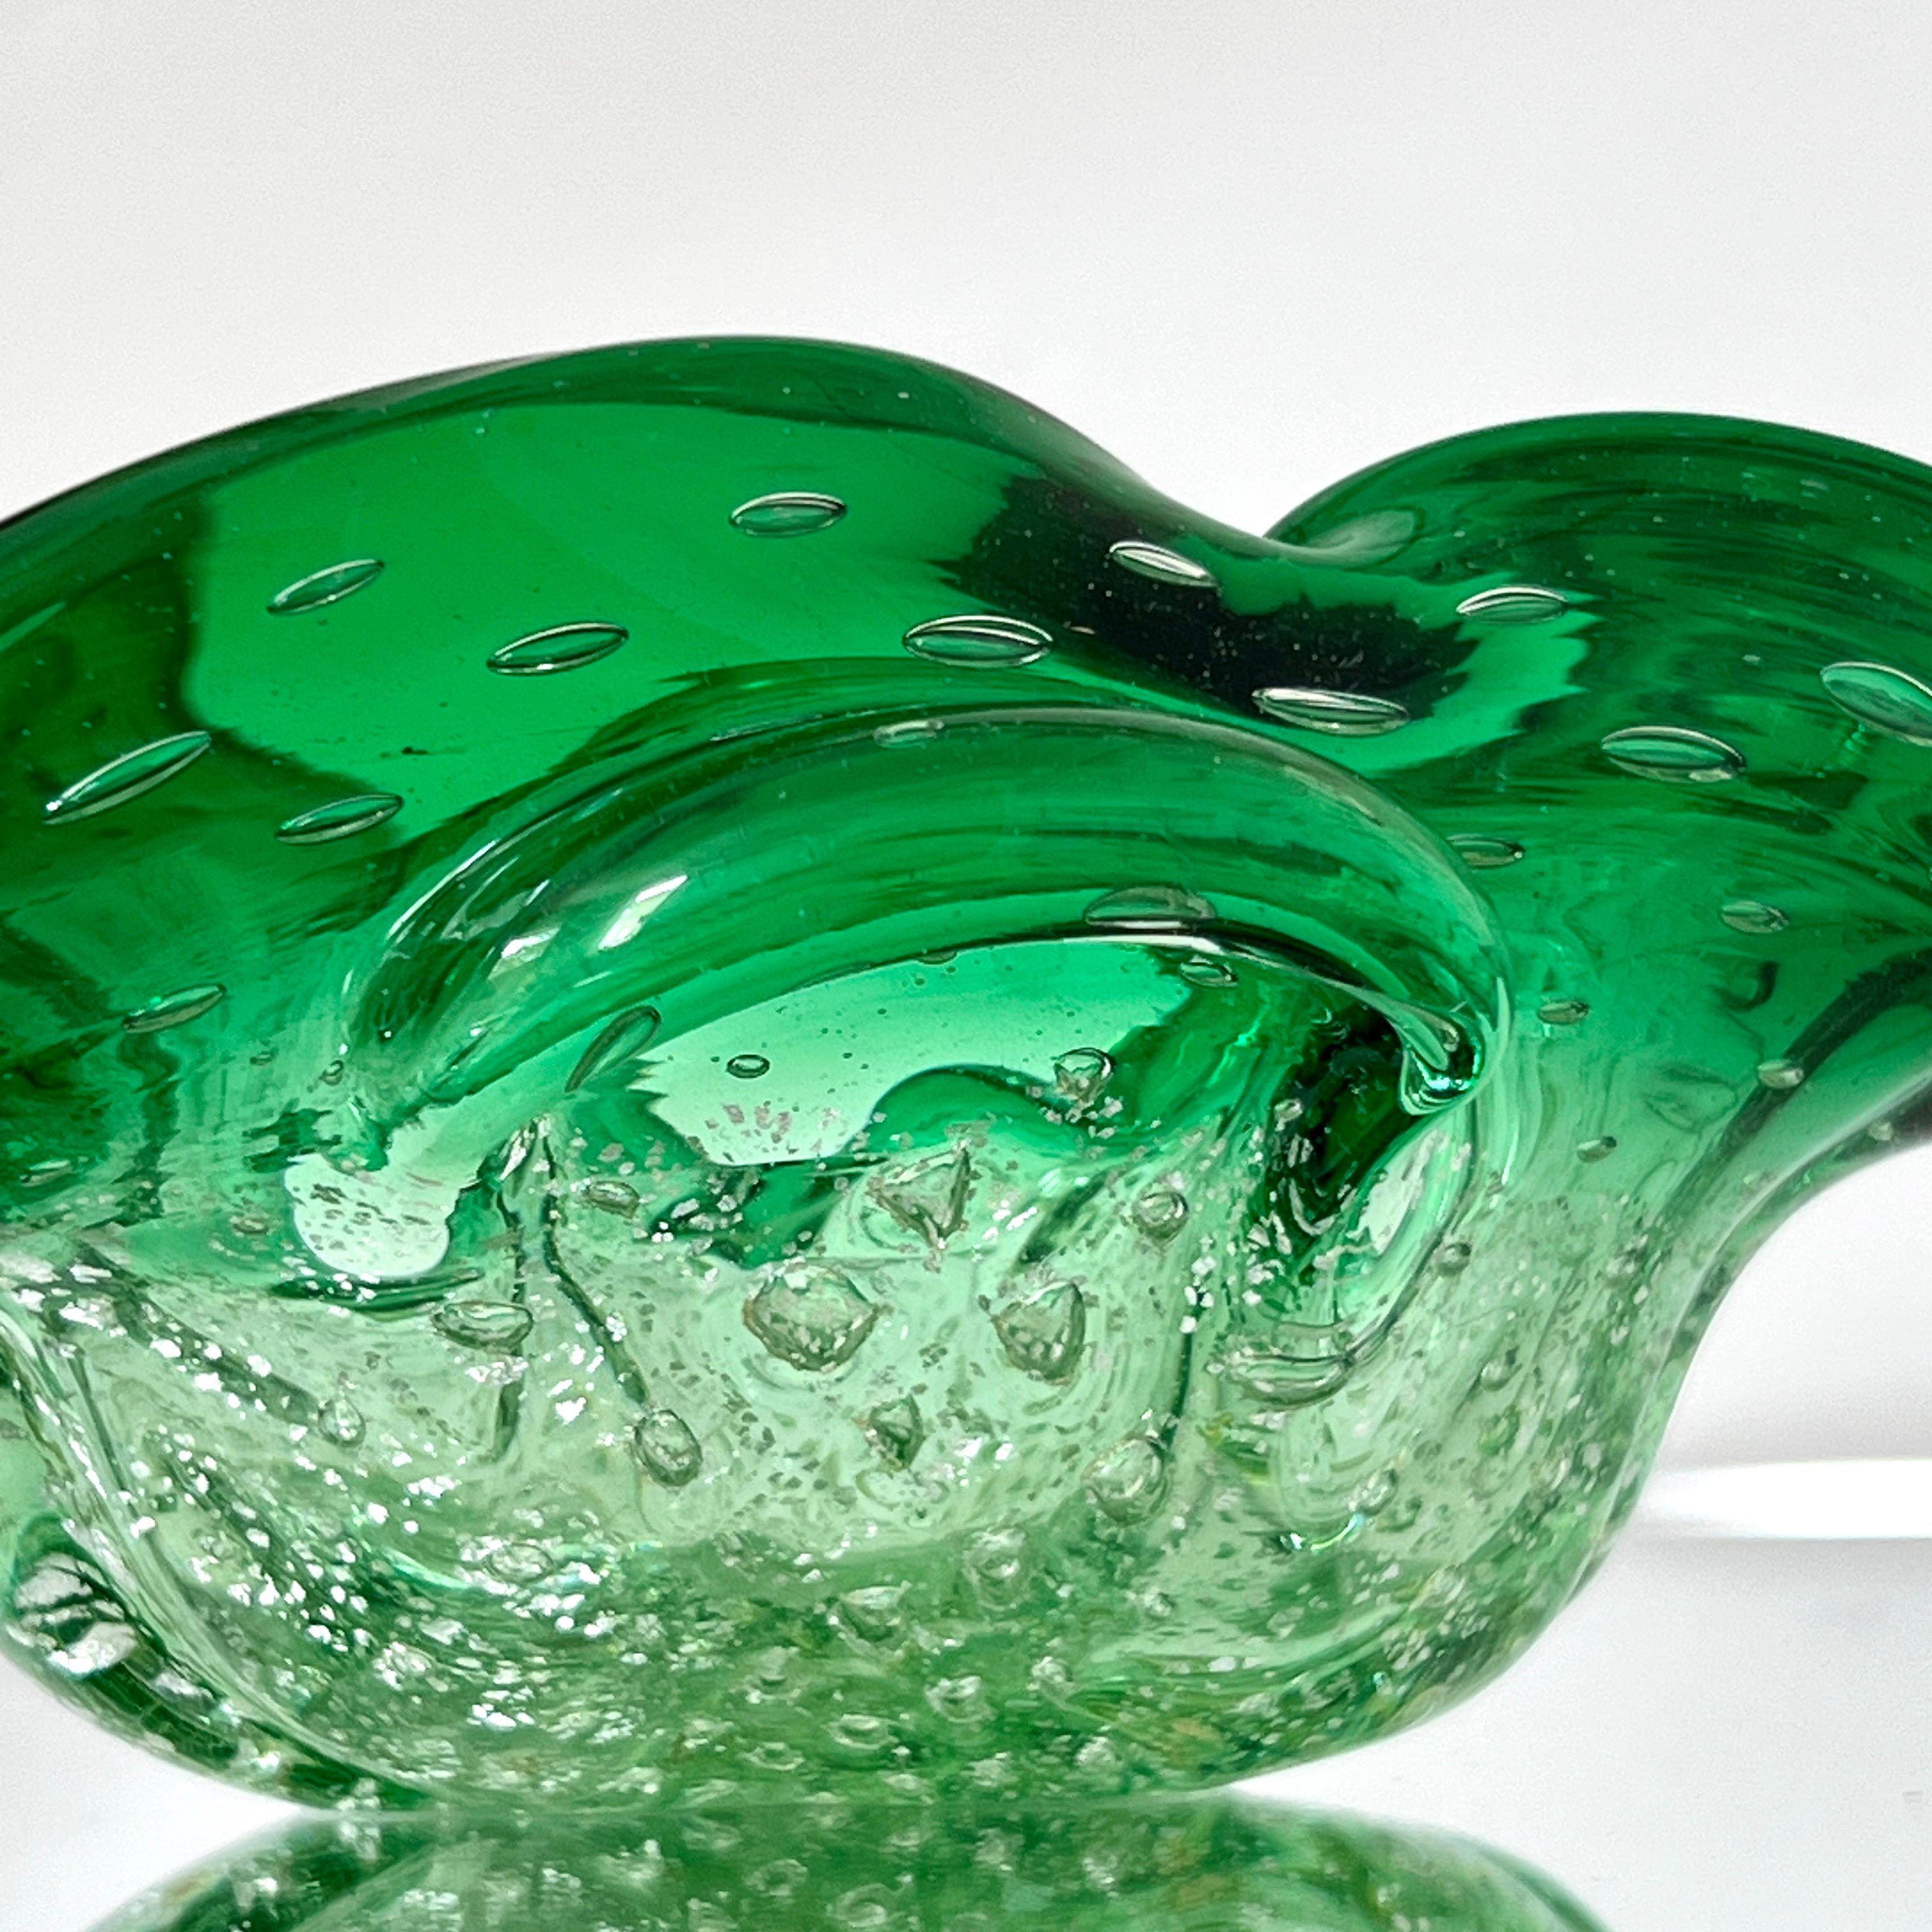 Murano Glass Green Murano Vide-Poche Bowl or Ashtray with Gold Leaf Accents, Italy, c. 1950 For Sale